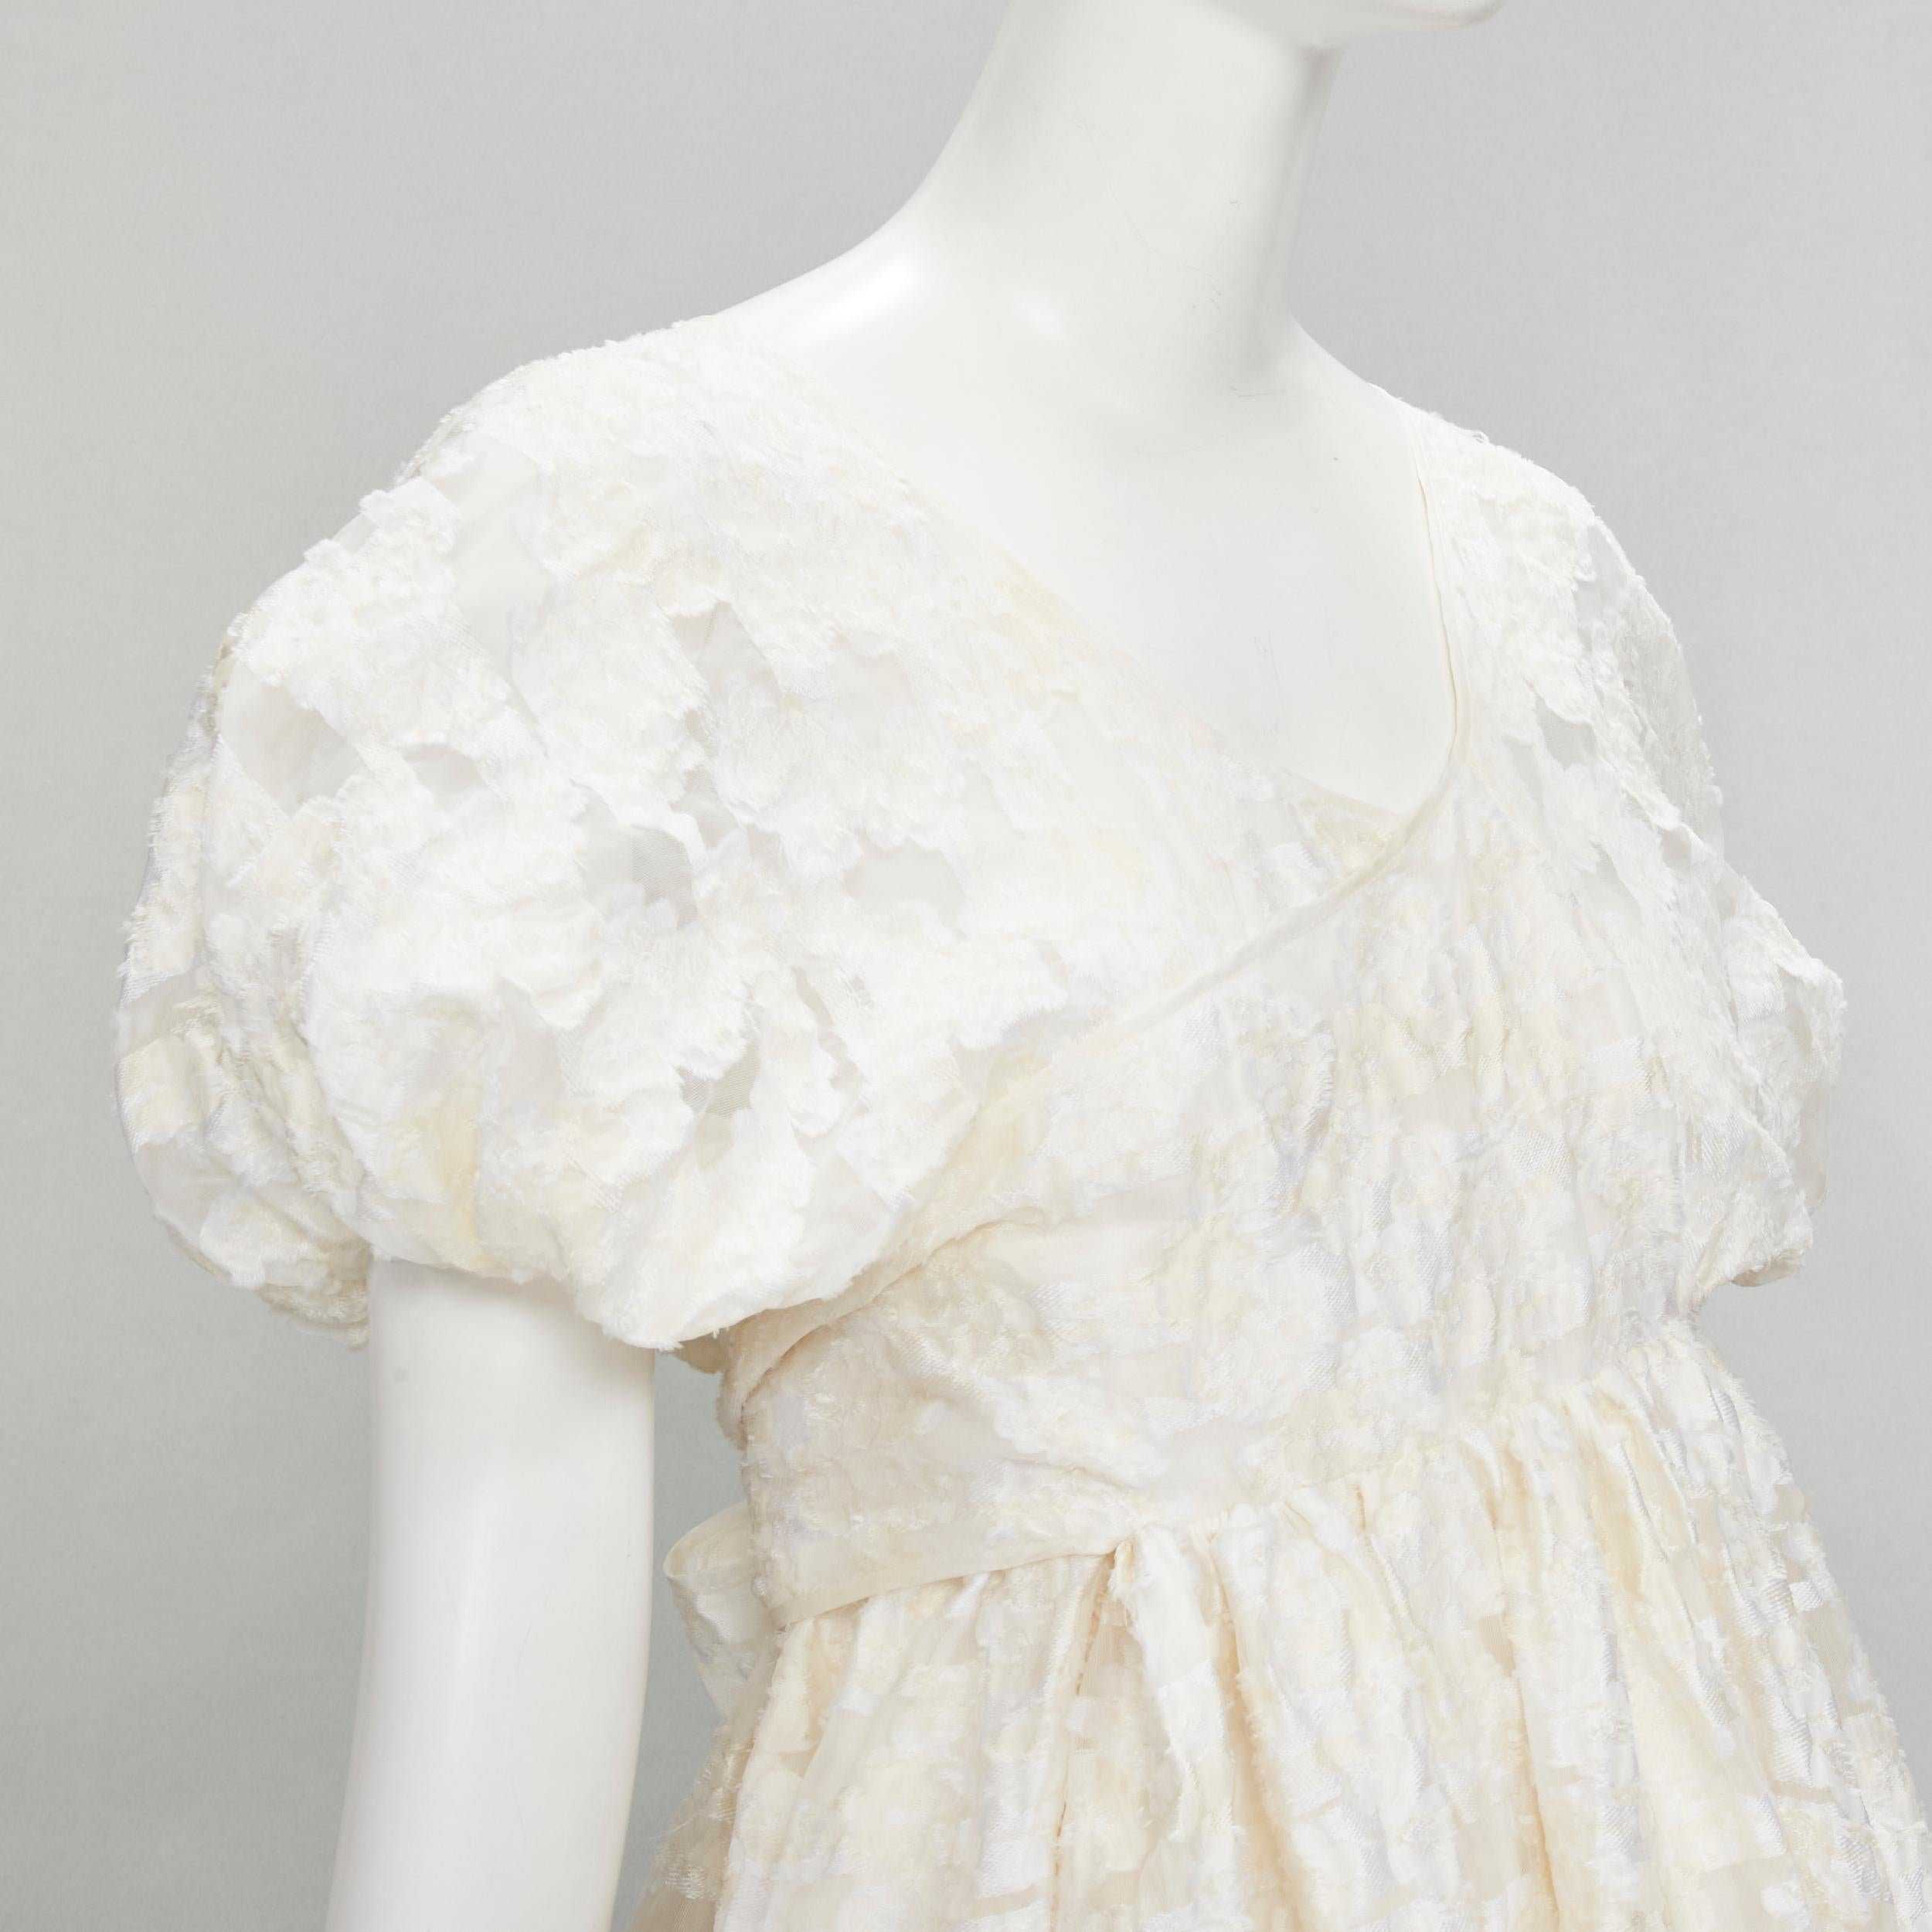 Women's new CECILIE BAHNSEN white floral fil-coupe organza flared bridal dress UK6 XS